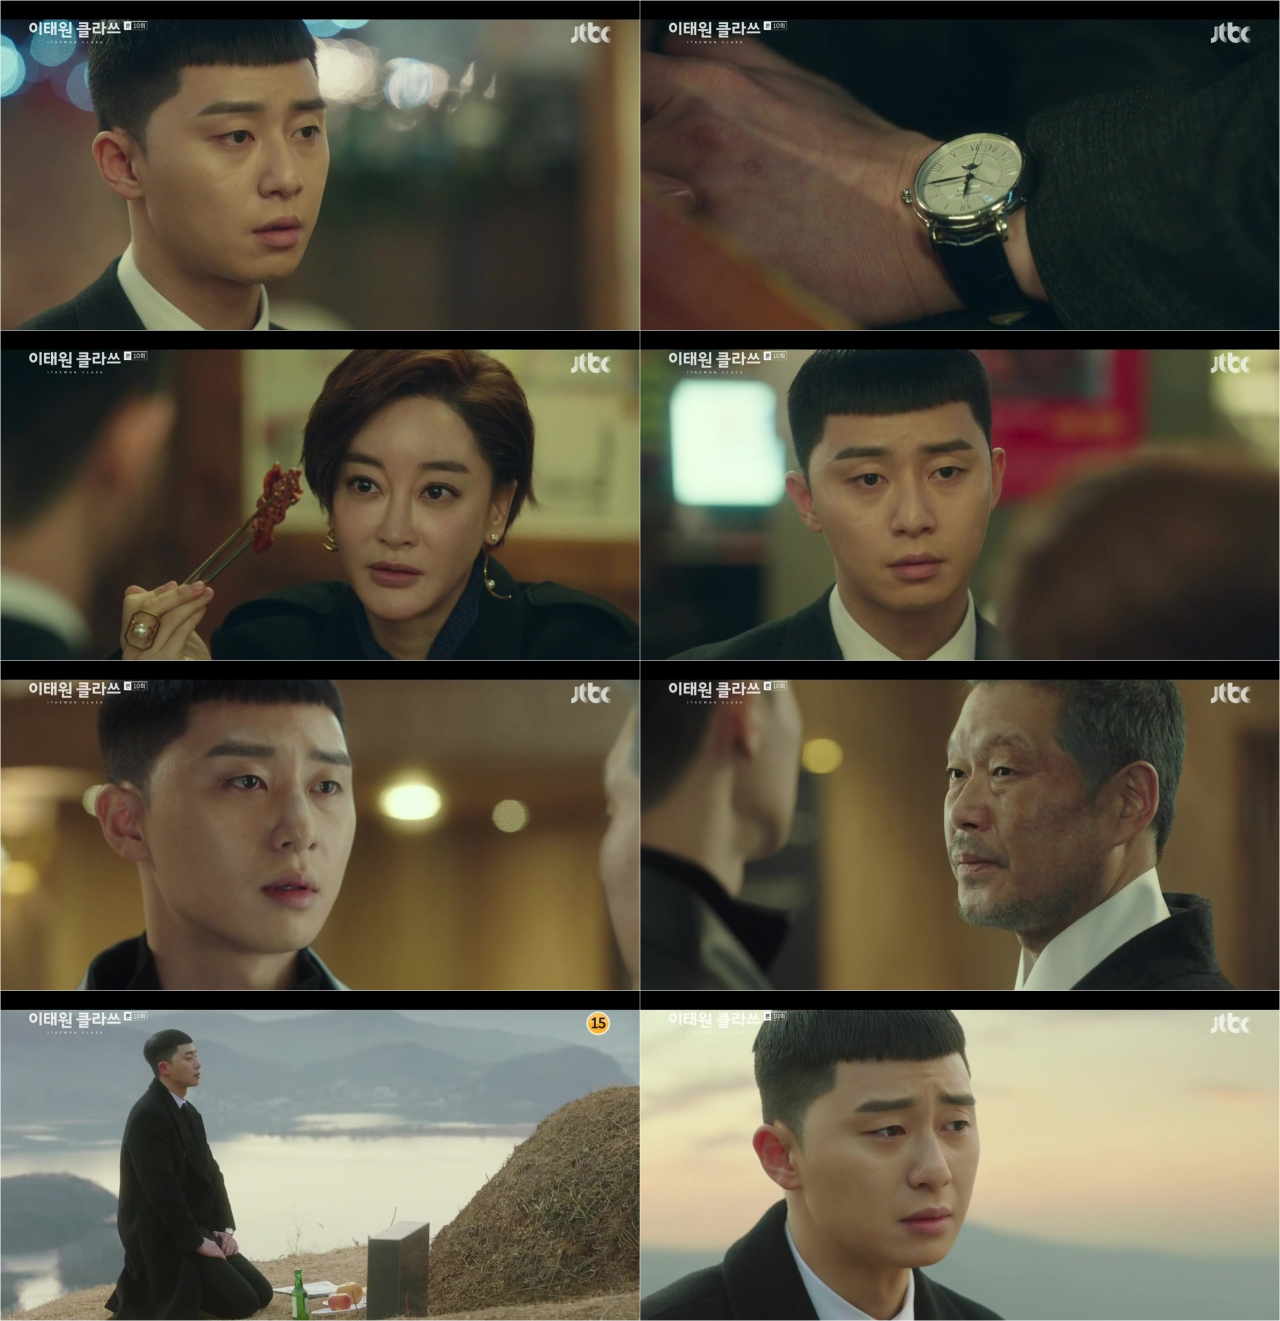 Per minute top TV viewer ratings soared to 17.1% as JTBC gilt drama Itaewon Klath hotter is getting hotter.The 10th episode, which was broadcast on the 29th, recorded 14.8% nationwide and 16.2% in the Seoul metropolitan area (Nilson Korea, based on paid households), maintaining the top spot in the same time zone for the ninth consecutive time, breaking its own top TV viewer ratings.Per minute TV viewer ratings The best minute that soared to 17.1% was the scene of Park Seo-joon and Kang Min-jung (Kim Hye-eun).The plan to bring down Jang Dae-hee (Yoo Jae-myung) as an opportunity to take the fall of the Jangga group has failed, and Park and Kang Min-jung, who met at Janggapocha, have talked about the kochujang spice pigs, which is the representative menu that made the present Jangga.Unlike the one that was collected by Jang, it was revealed that the menu was developed by Park Sung-yeol (Son Hyun-joo), the father of Park Sae-sae.The clock, which was kept as a fathers relic, was also revealed to the public that it was a gift received in return for turning the ball to Chang.Kang Min-jung asked Park to Touch and fight Chang on behalf of himself who lost everything.The two faces, which are like the impression of Chairman Chang, gave a creepy reversal. The confession of a hit-and-run incident by President Chang (Security), led to a crisis in the Jangga group.Changs intention to protect my son was strong in the companys opinion that he should throw out The Fountainhead.Park and Joy (played by Kim Dae-mi), who were watching his reaction, decided to use it as a counterattack timing.Kang Min-jung, who was told to go down to the governor of Pajin, was sentenced to seven years in prison for helpless punishment by his father, The Fountainhead.With everyone falling into a bad spot, Roys Chest, which failed to attack, became even hotter.This Jang Dae-hee has made you an enemy.In Changs declaration of war, I promise the same thing with all my promises, Parks pledge to keep you from being left alone, signaled an unfinished rebellion.At the end of the broadcast, Roy was also drawn to visit his fathers grave.He recalled his fathers voice, which was asking how is the taste of alcohol by drinking a glass of shochu, and he rang the audiences Chest with the tears of longing and the Chest answer I still write.